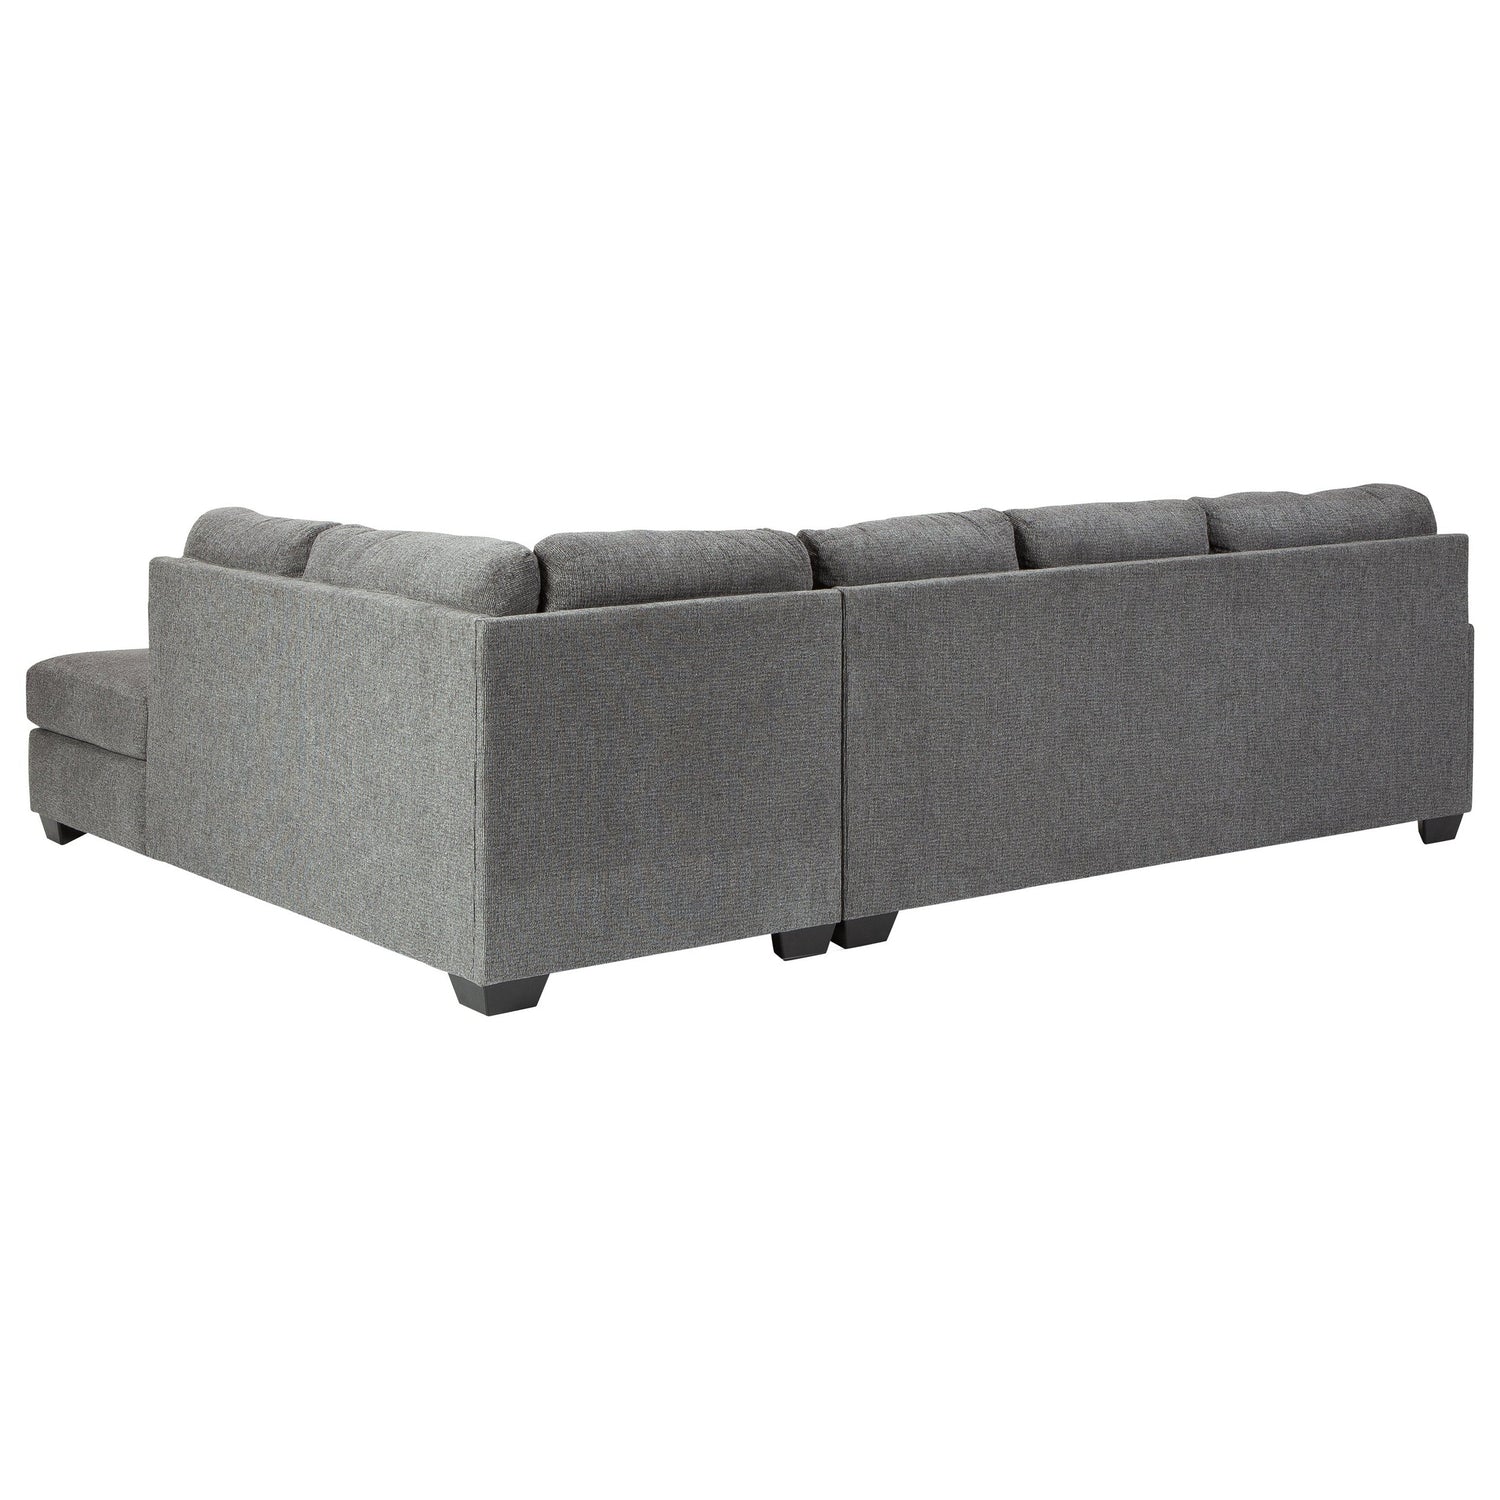 Dalhart 2-Piece Sectional with Chaise Ash-85703S2